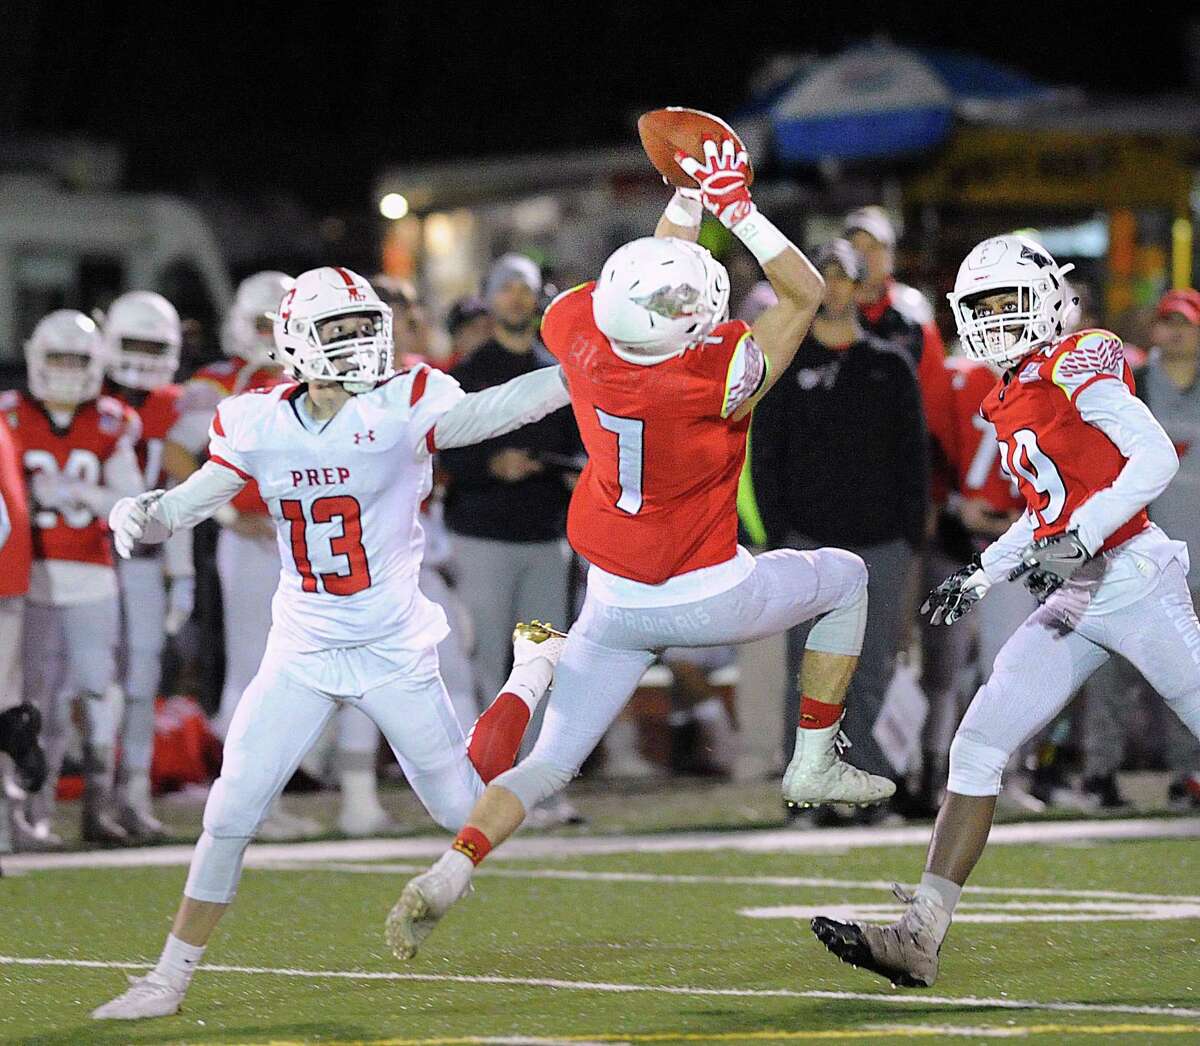 At center, Greenwich defender Charlie Ducret (#7) made an interception as he stepped in front of Fairfield Prep receiver Christopher Duffy (#13), at left, during the first quarter of the Class LL high school football playoff game between Greenwich High School and Fairfield Prep at Greenwich, Conn., Tuesday, Nov. 28, 2017.